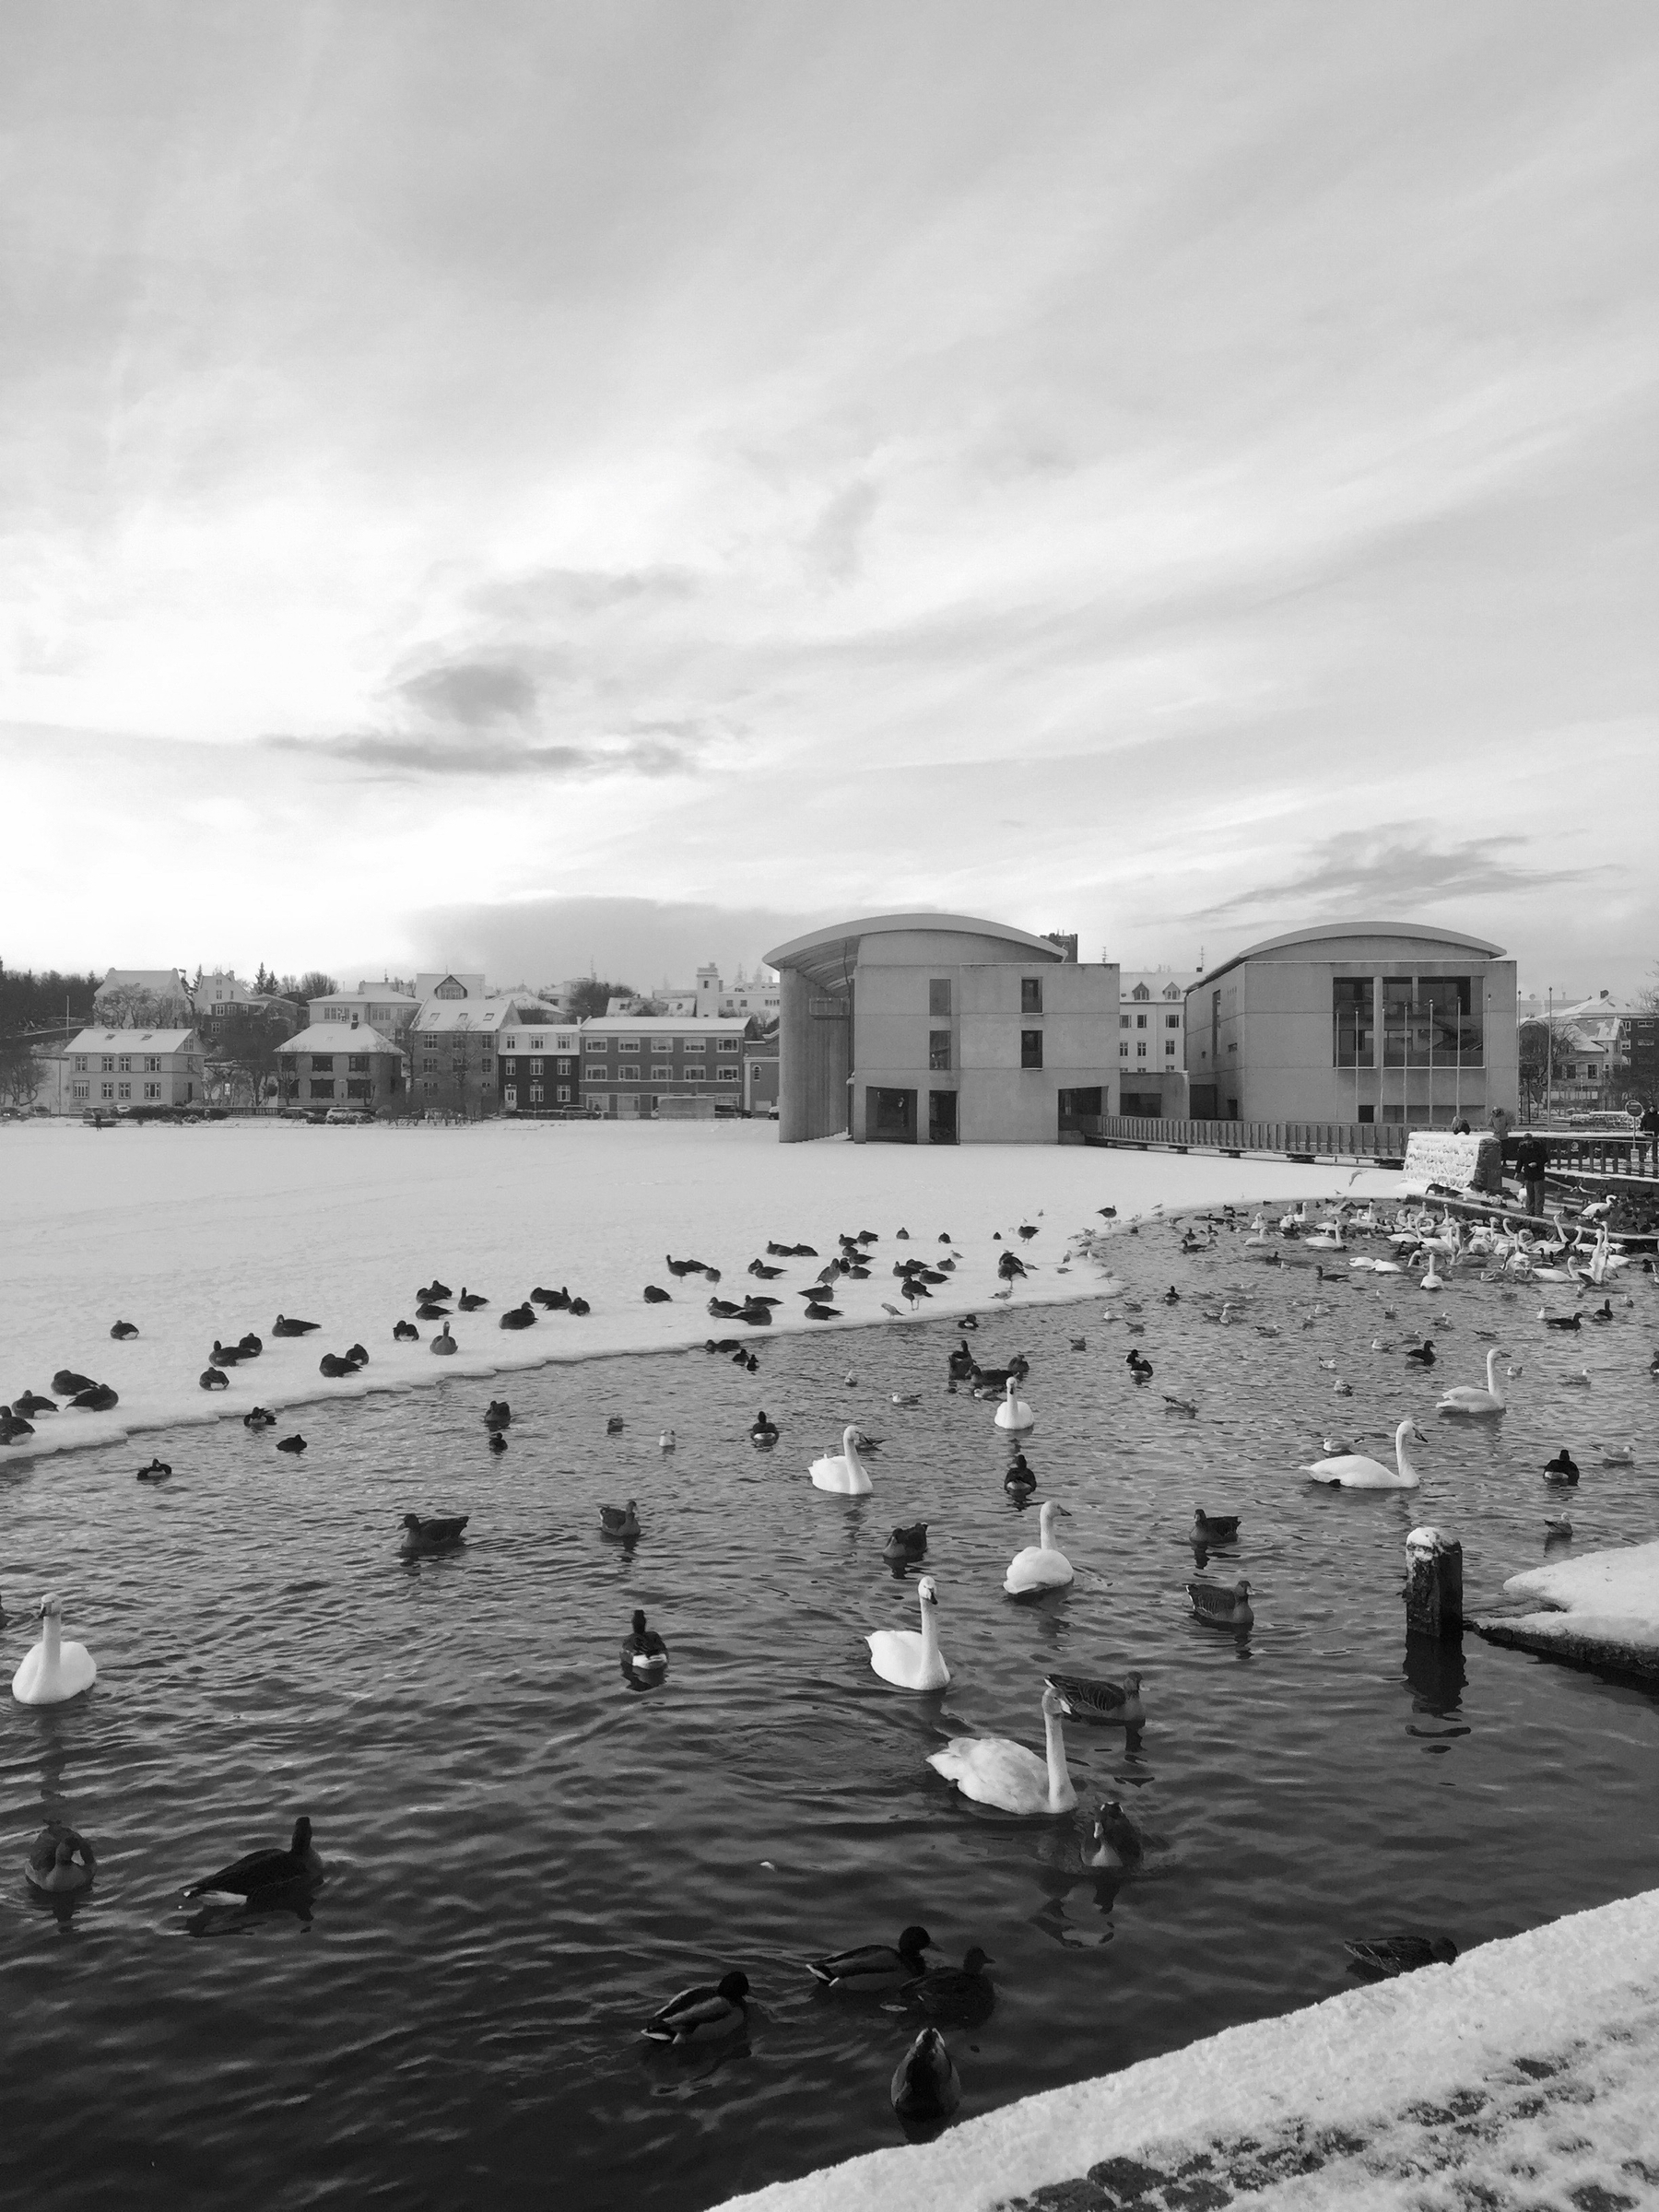 A view of the pond and Reykjavík city hall. Part of the pond is frozen but the birds keep to the part that isn’t.